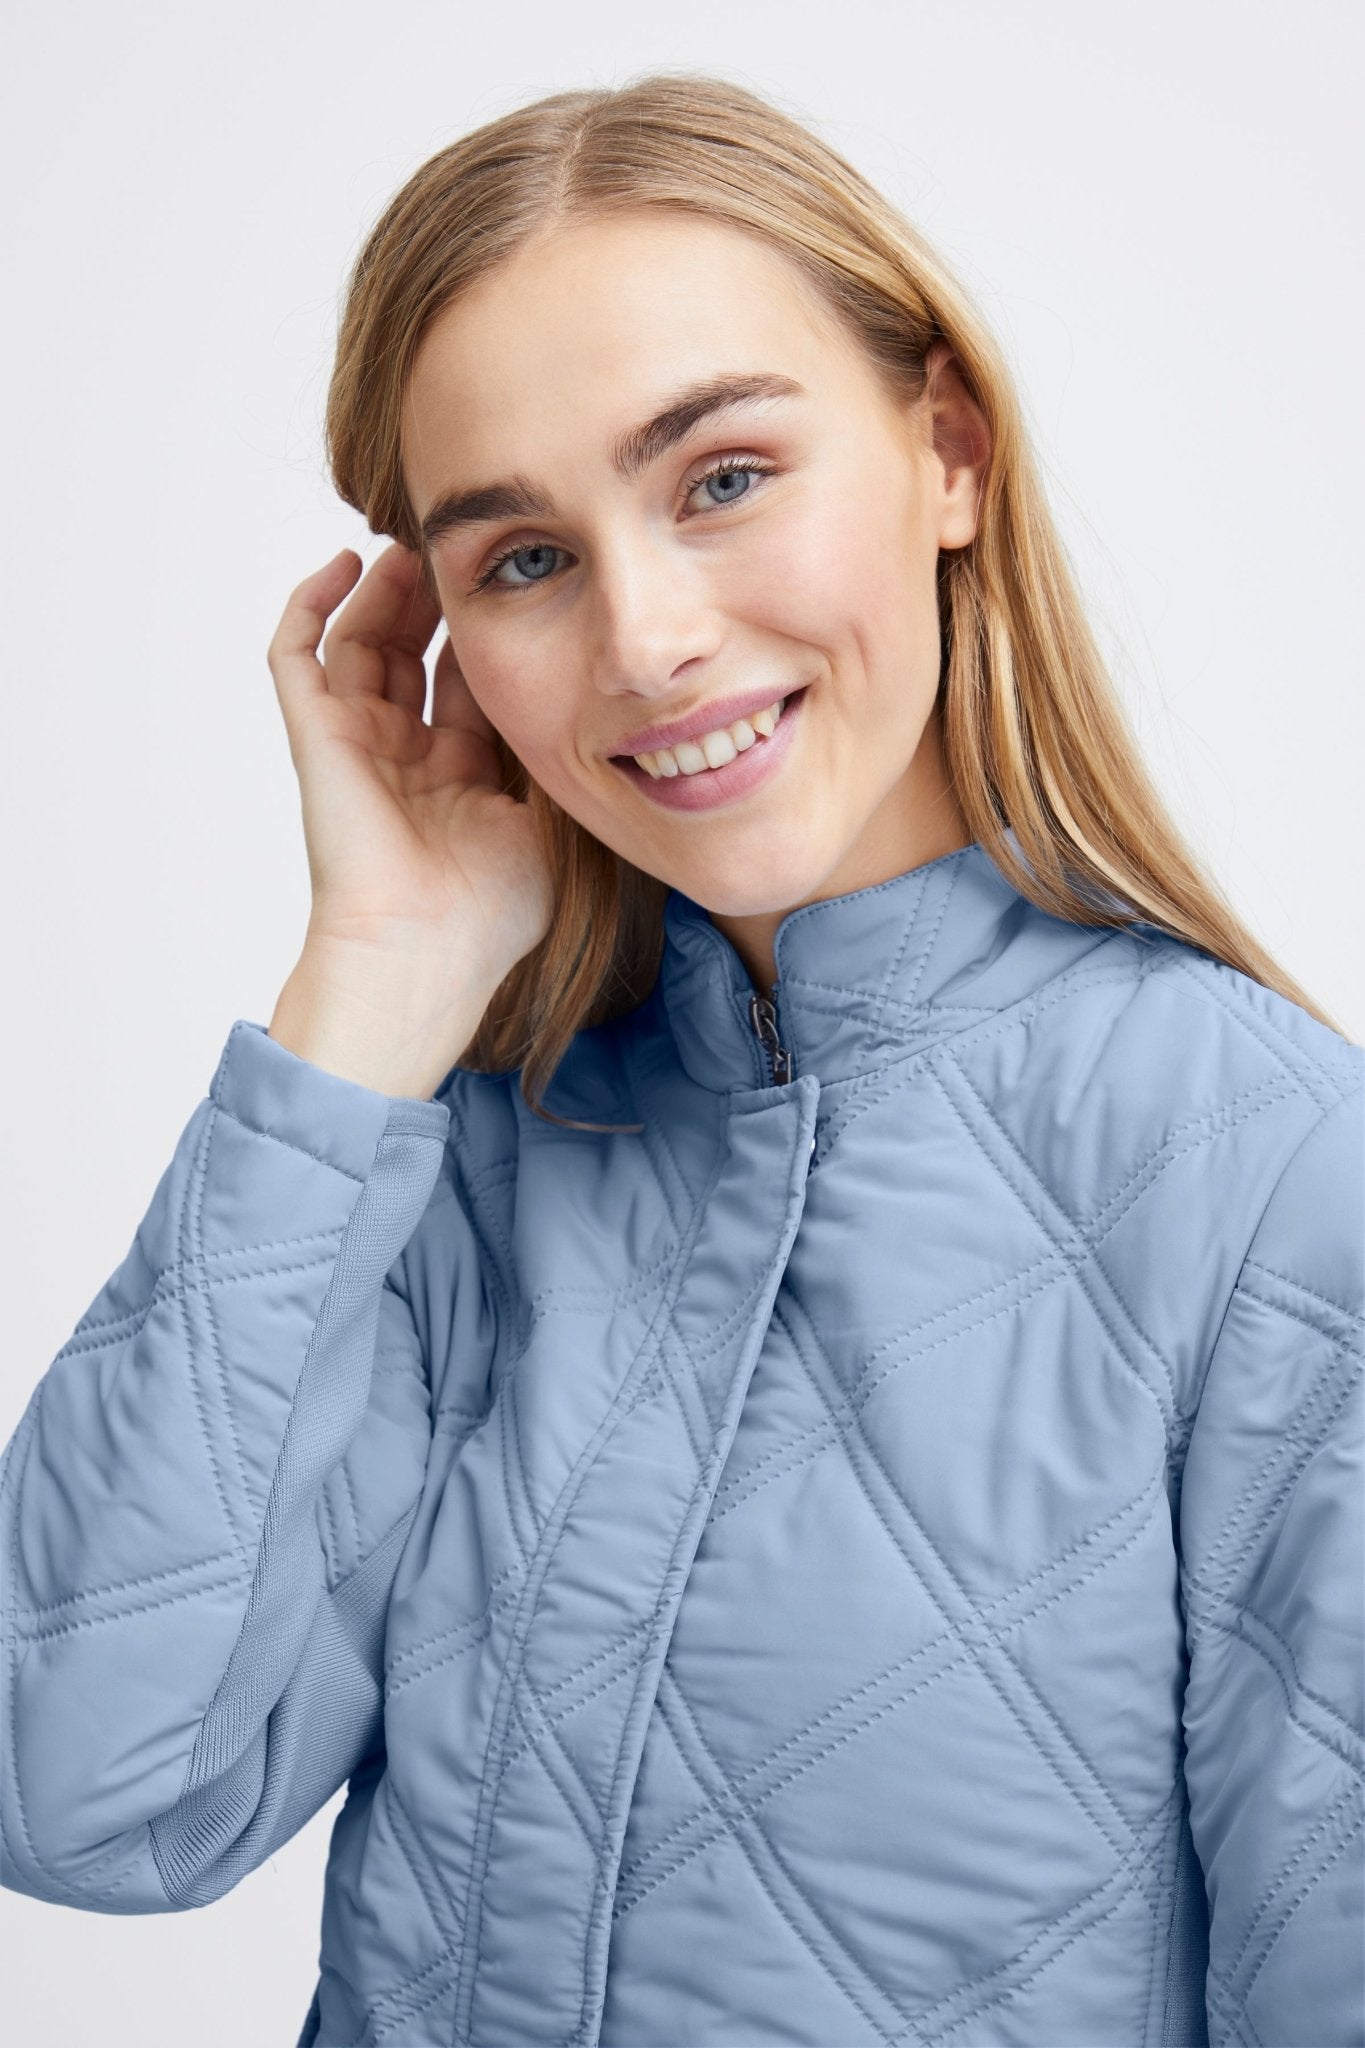 Fay quilted jacket by Fransa - endless sky - Blue Sky Fashions & Lingerie